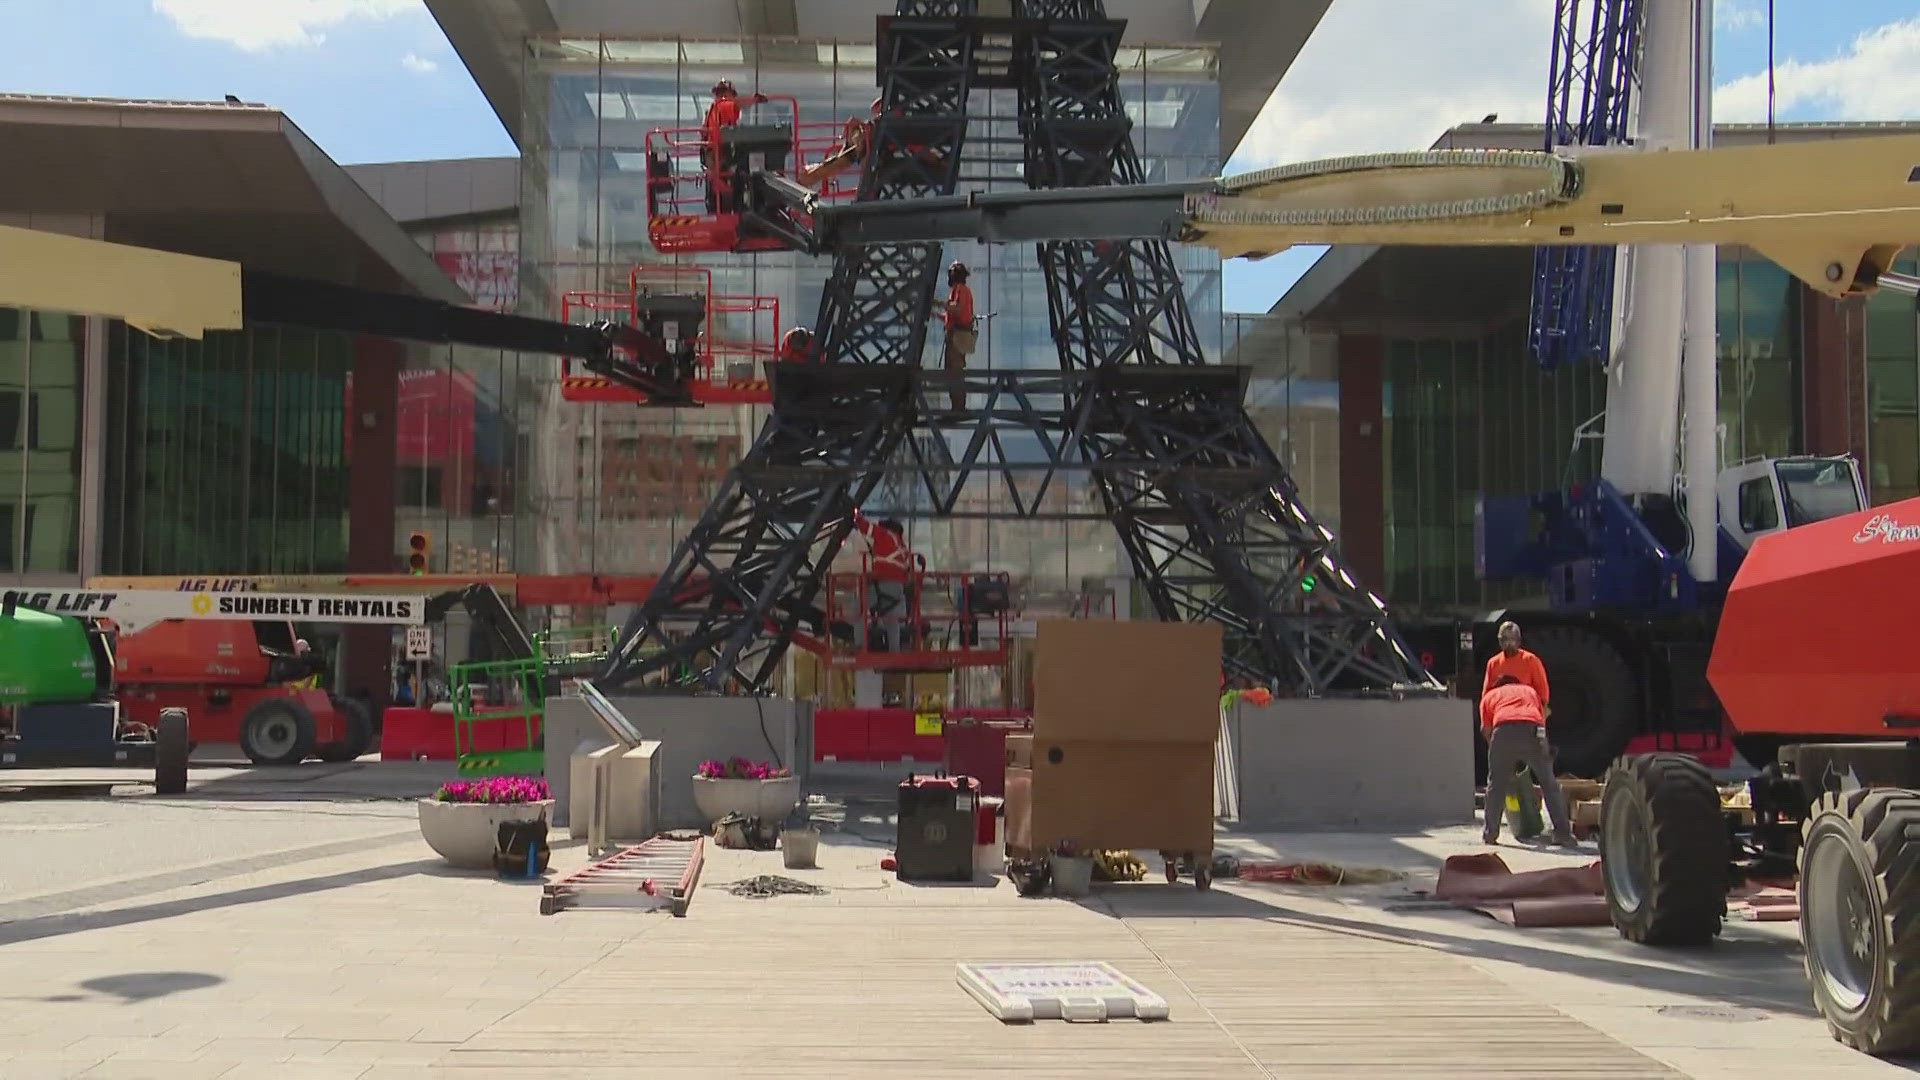 Right now there is no official plan on where this Eiffel Tower is going.